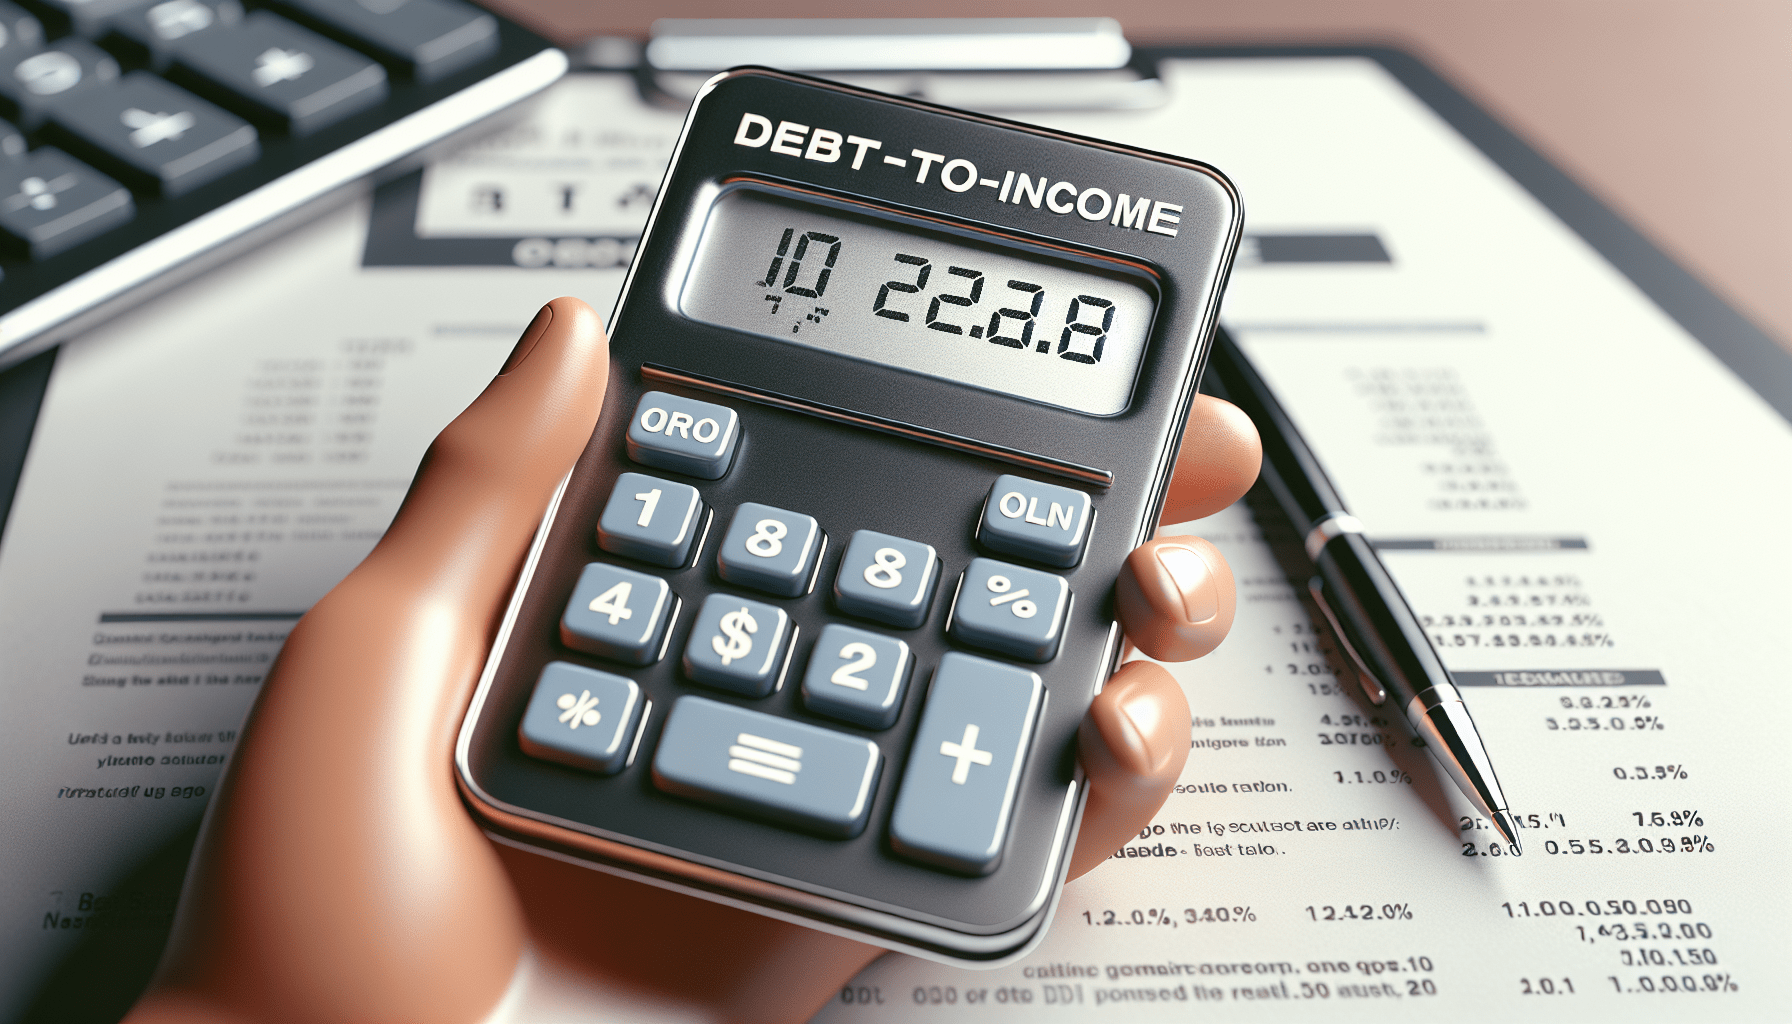 How Does The Debt-to-income Ratio (DTI) Impact My Auto Loan Eligibility?